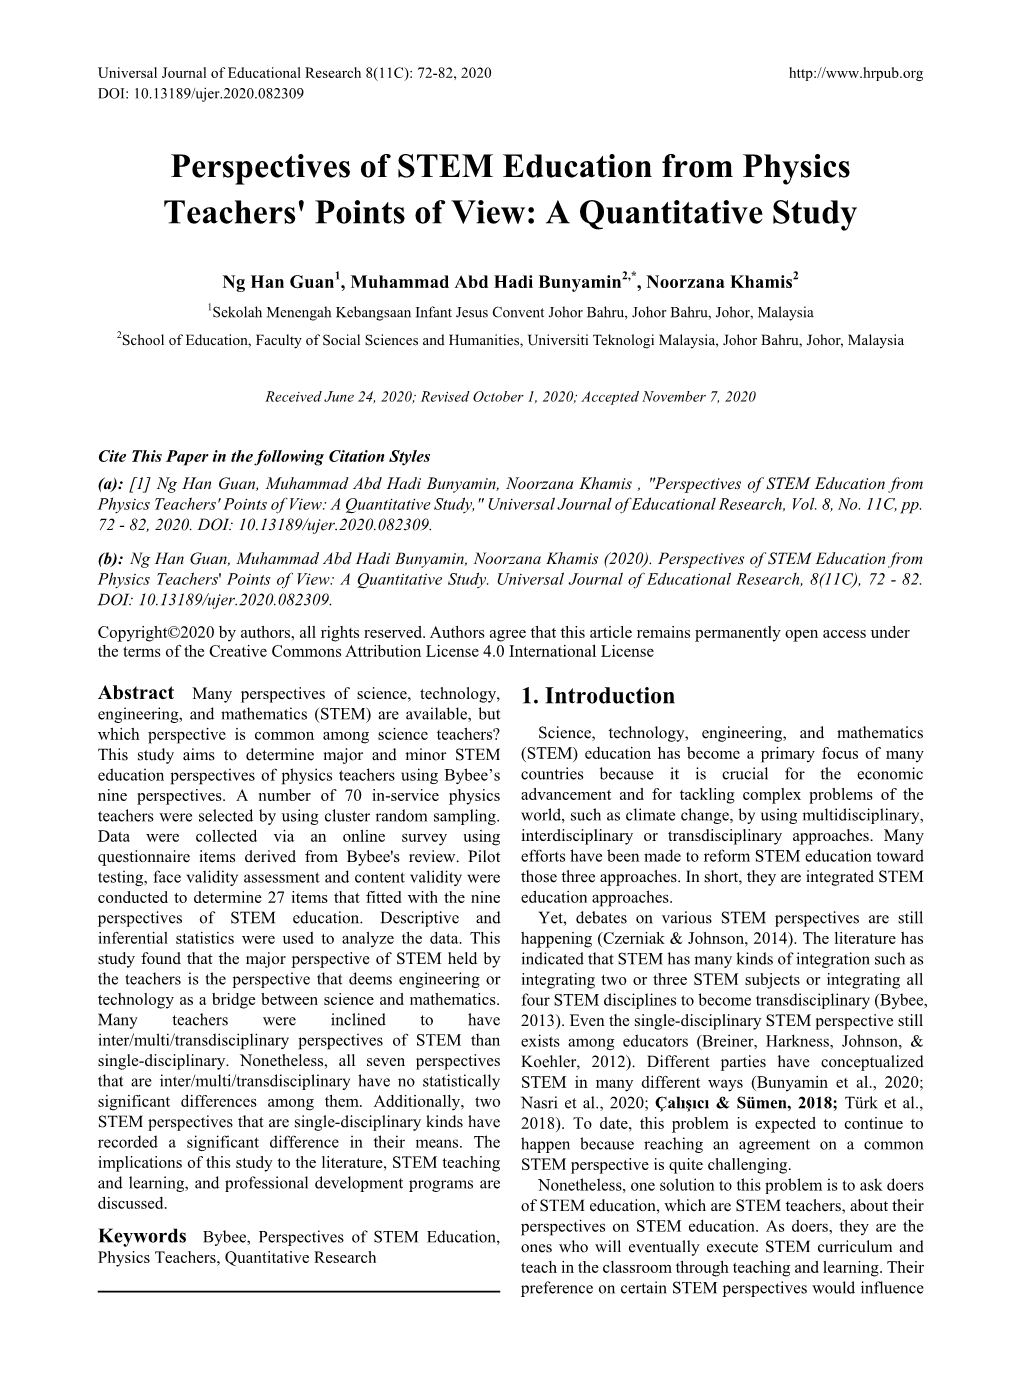 Perspectives of STEM Education from Physics Teachers' Points of View: a Quantitative Study